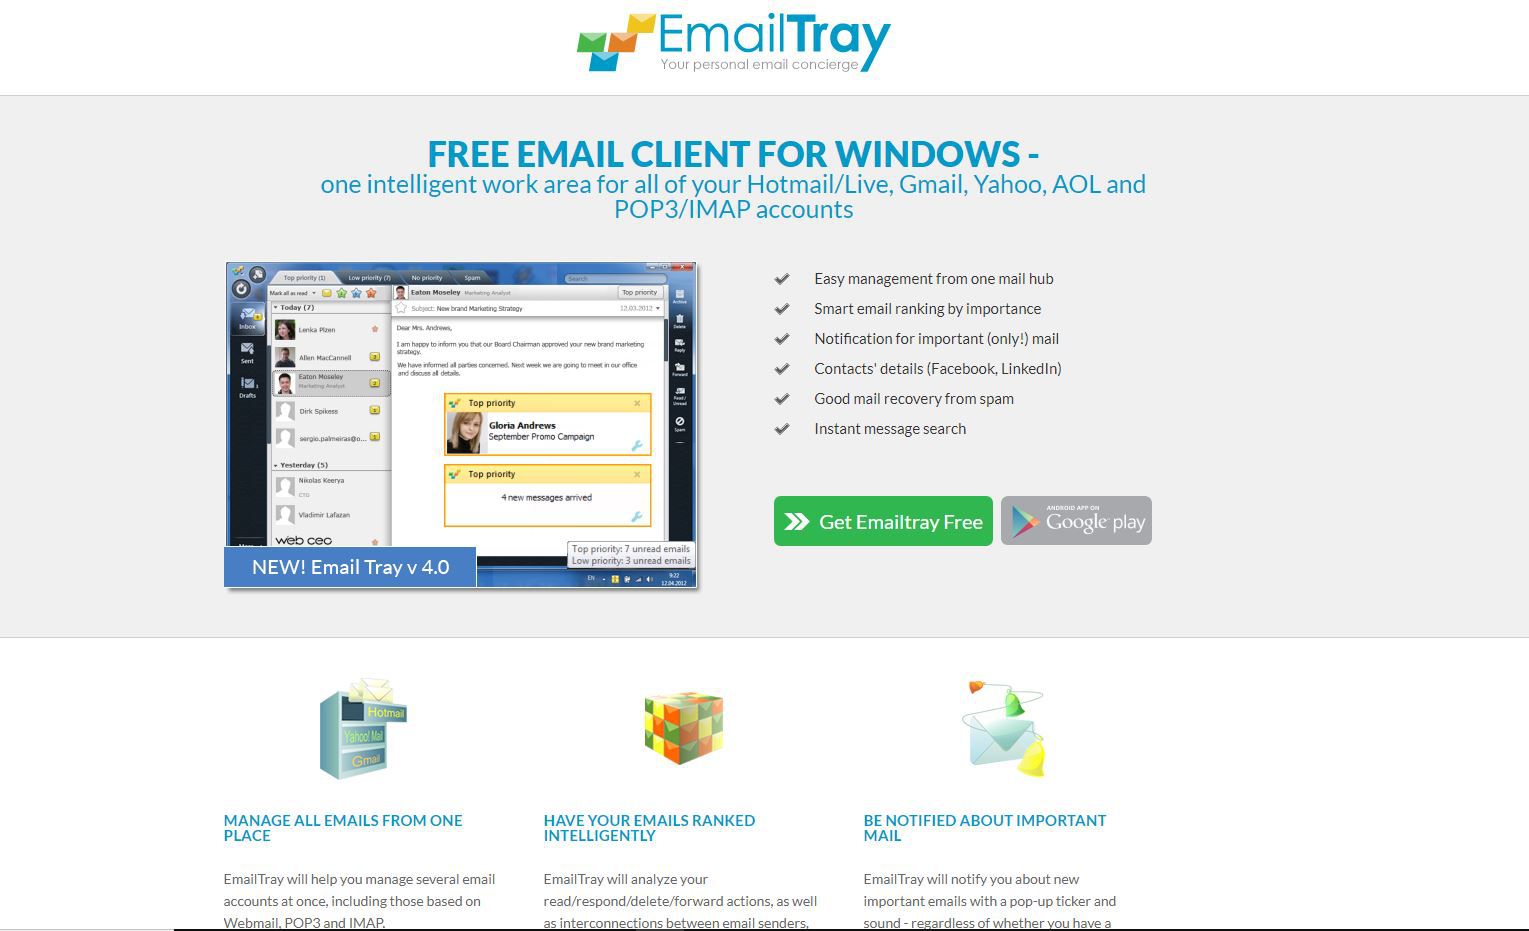 EmailTray-website